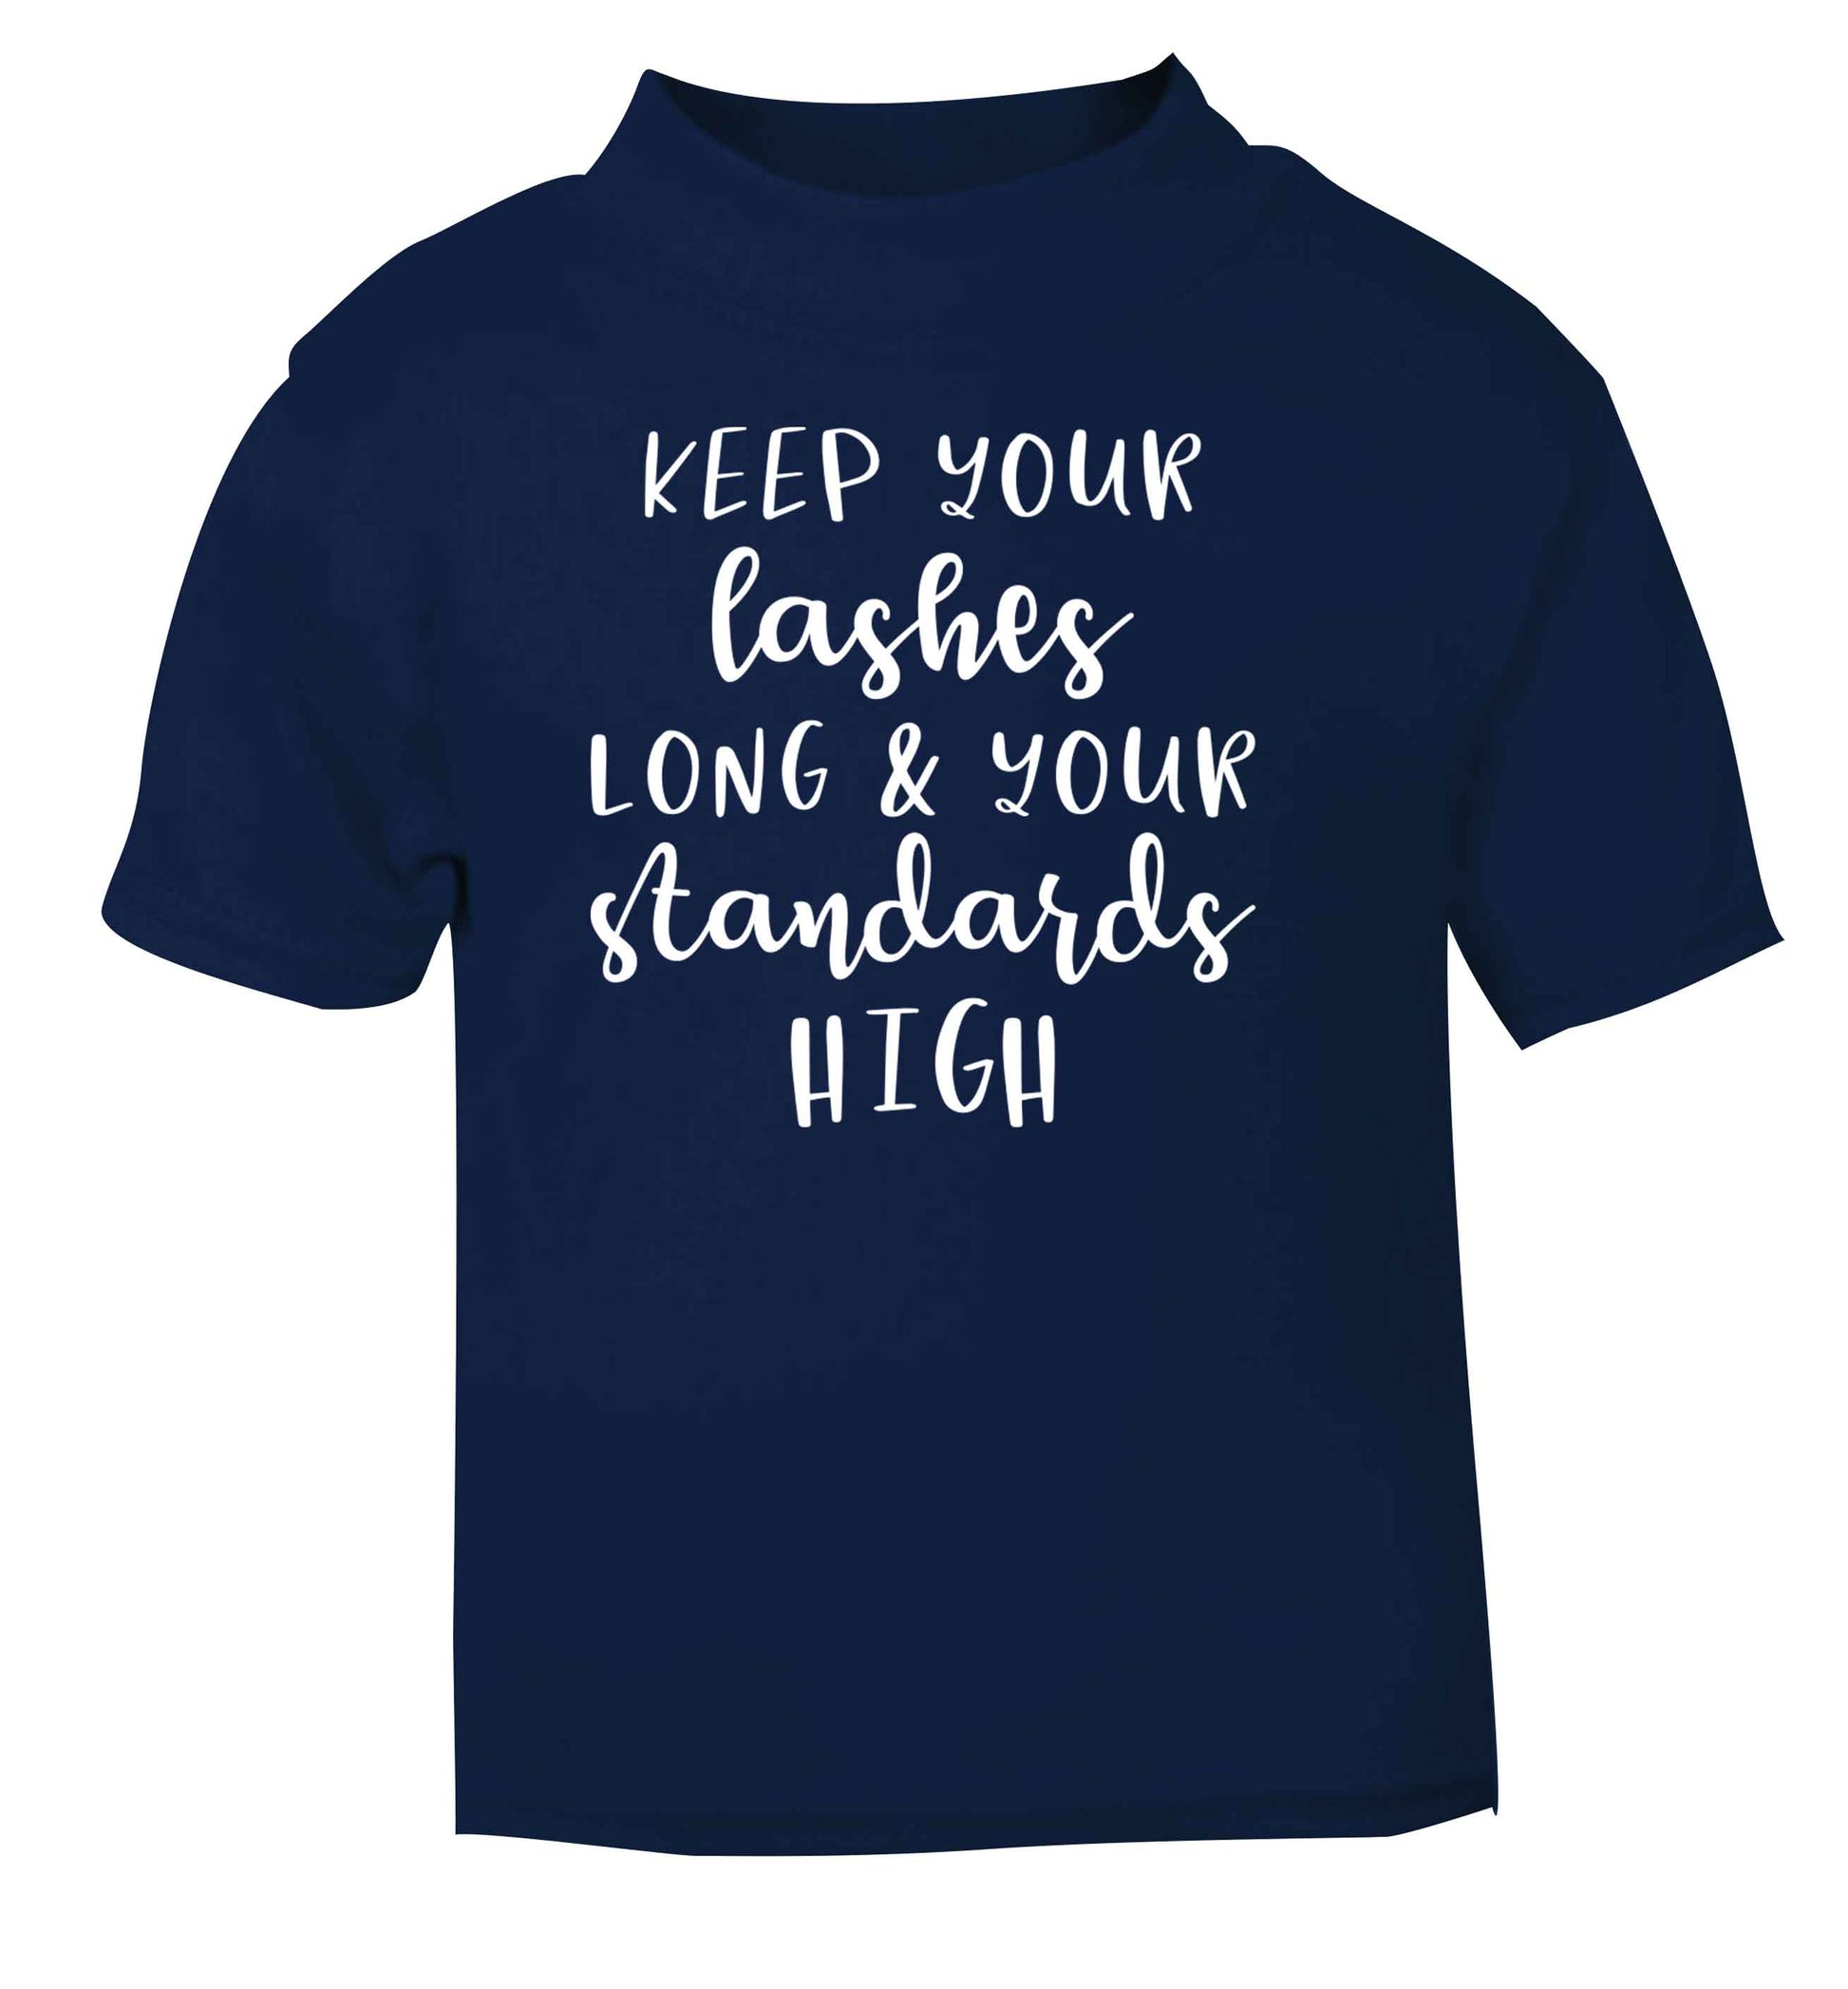 Keep your lashes long and your standards high navy Baby Toddler Tshirt 2 Years